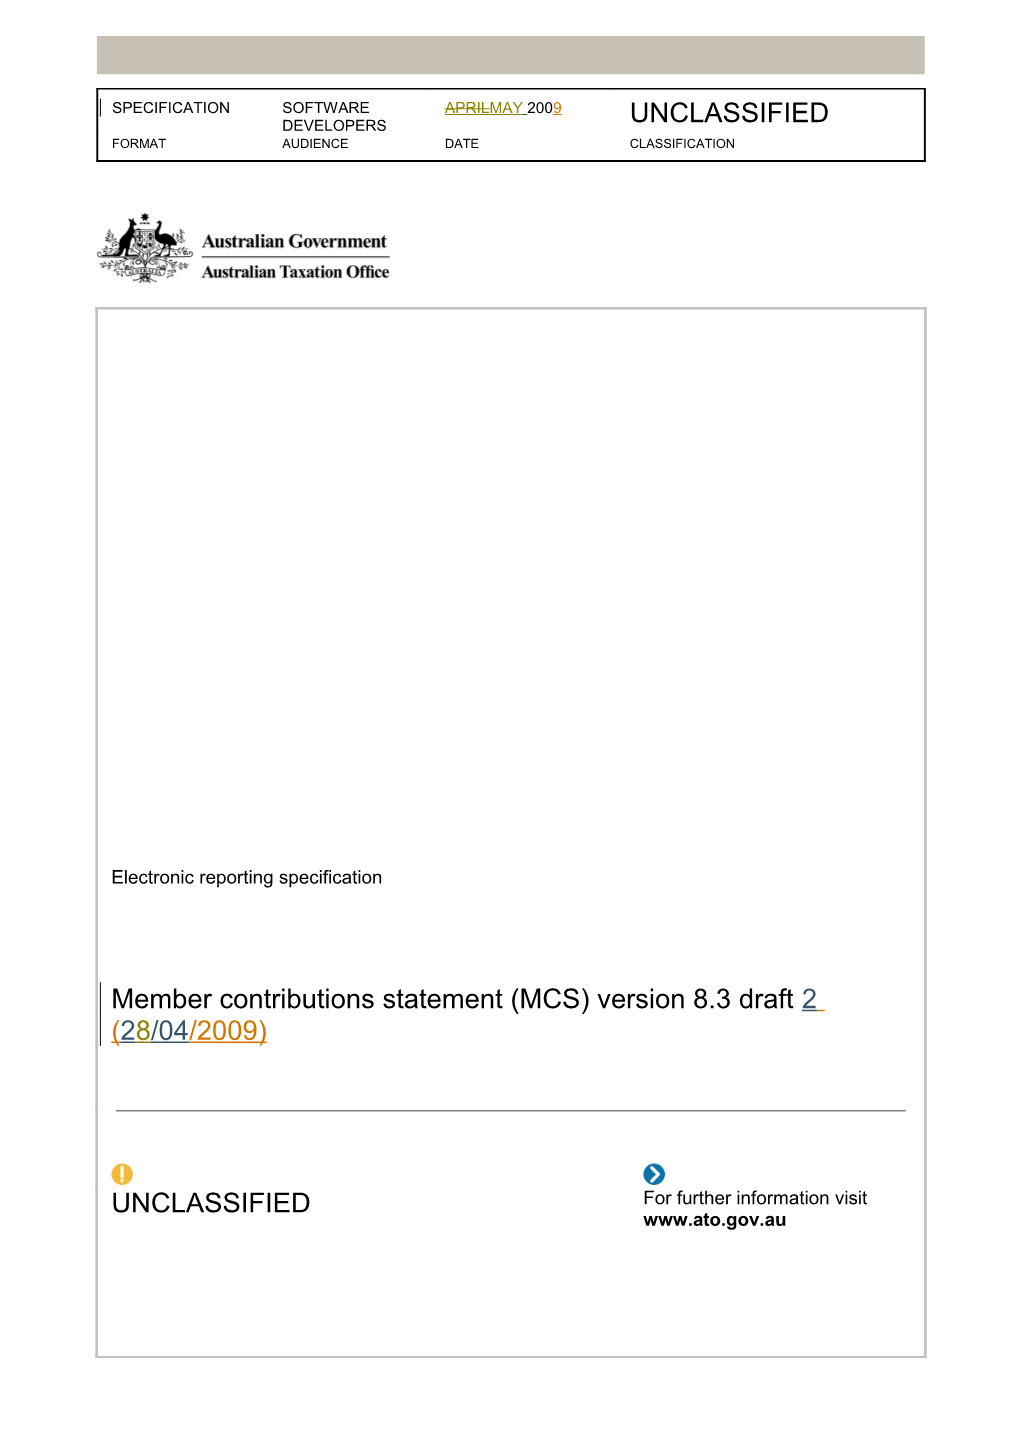 Electronic Reporting Specification - Member Contributions Statement